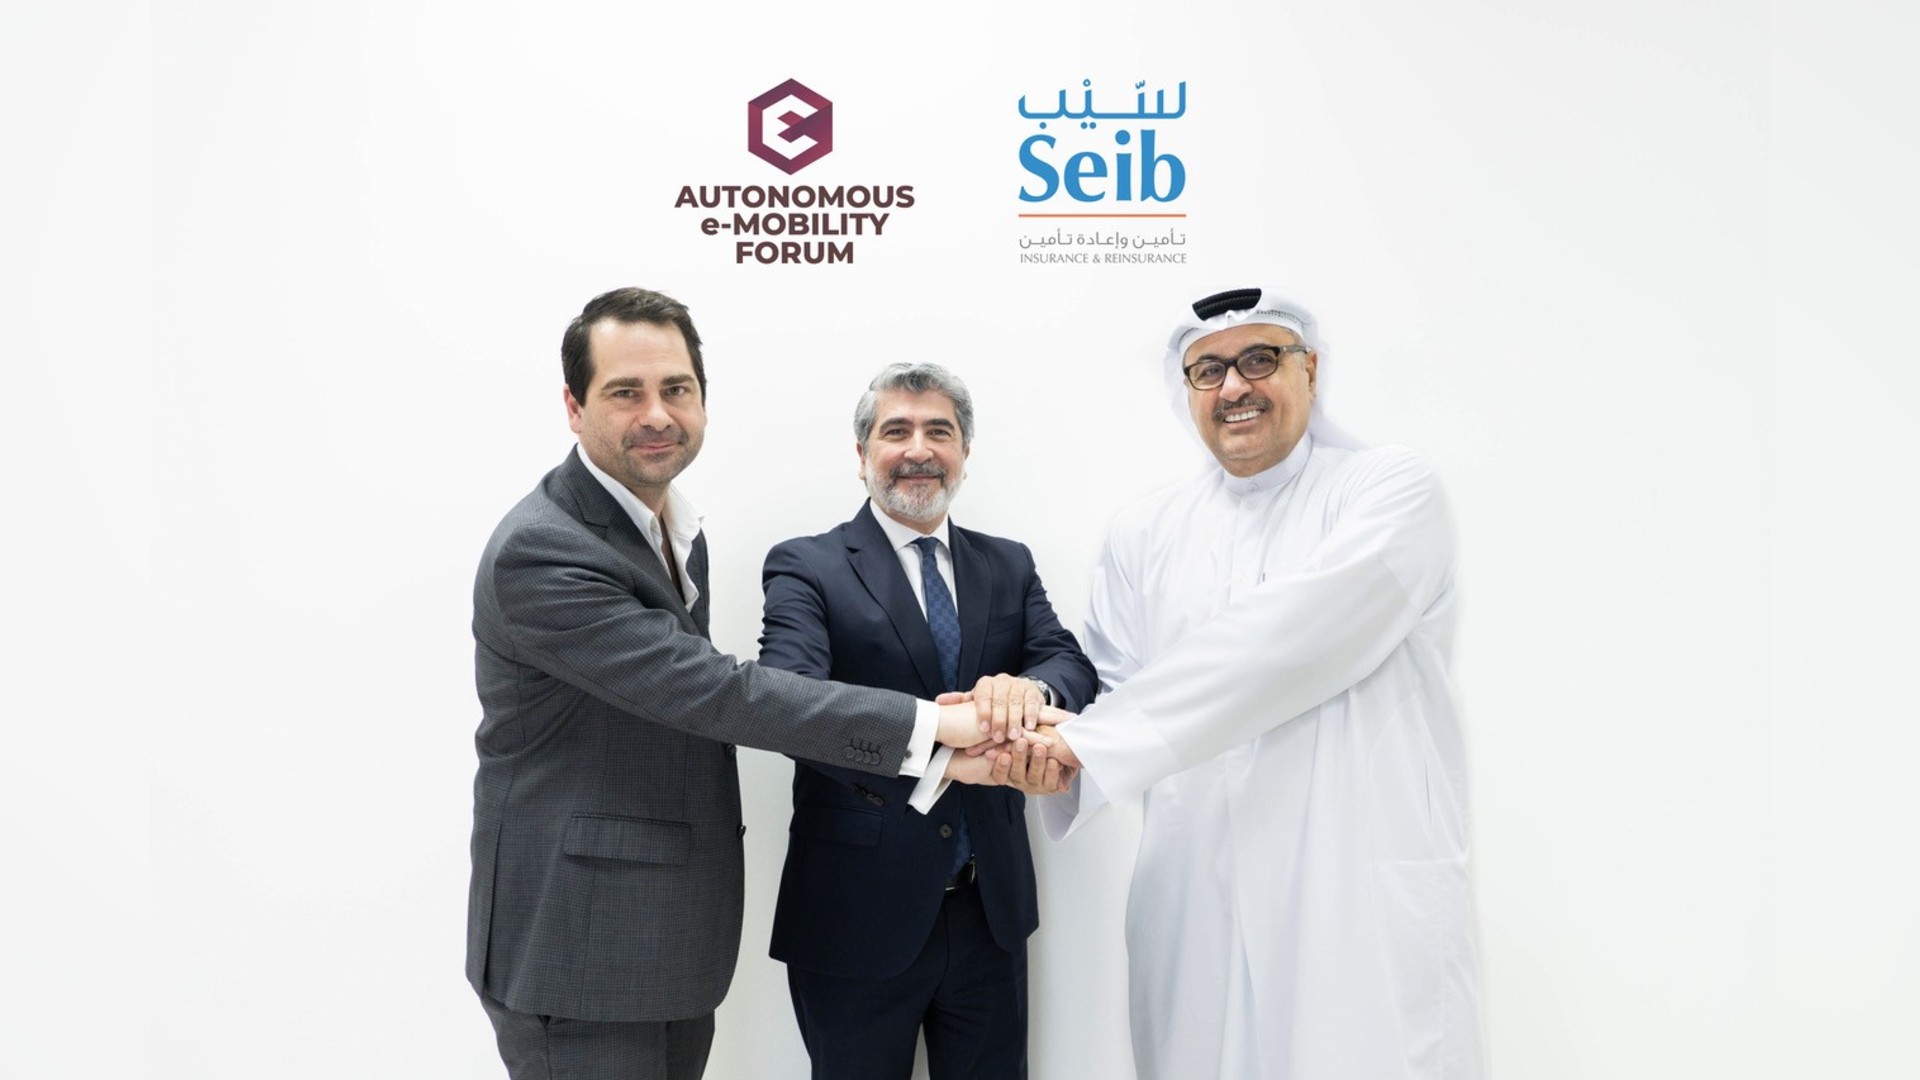 Qatar Tourism, Qatar Airways, and Seib Insurance Join the List of Top-Tier Partners to the Autonomous e-Mobility Forum